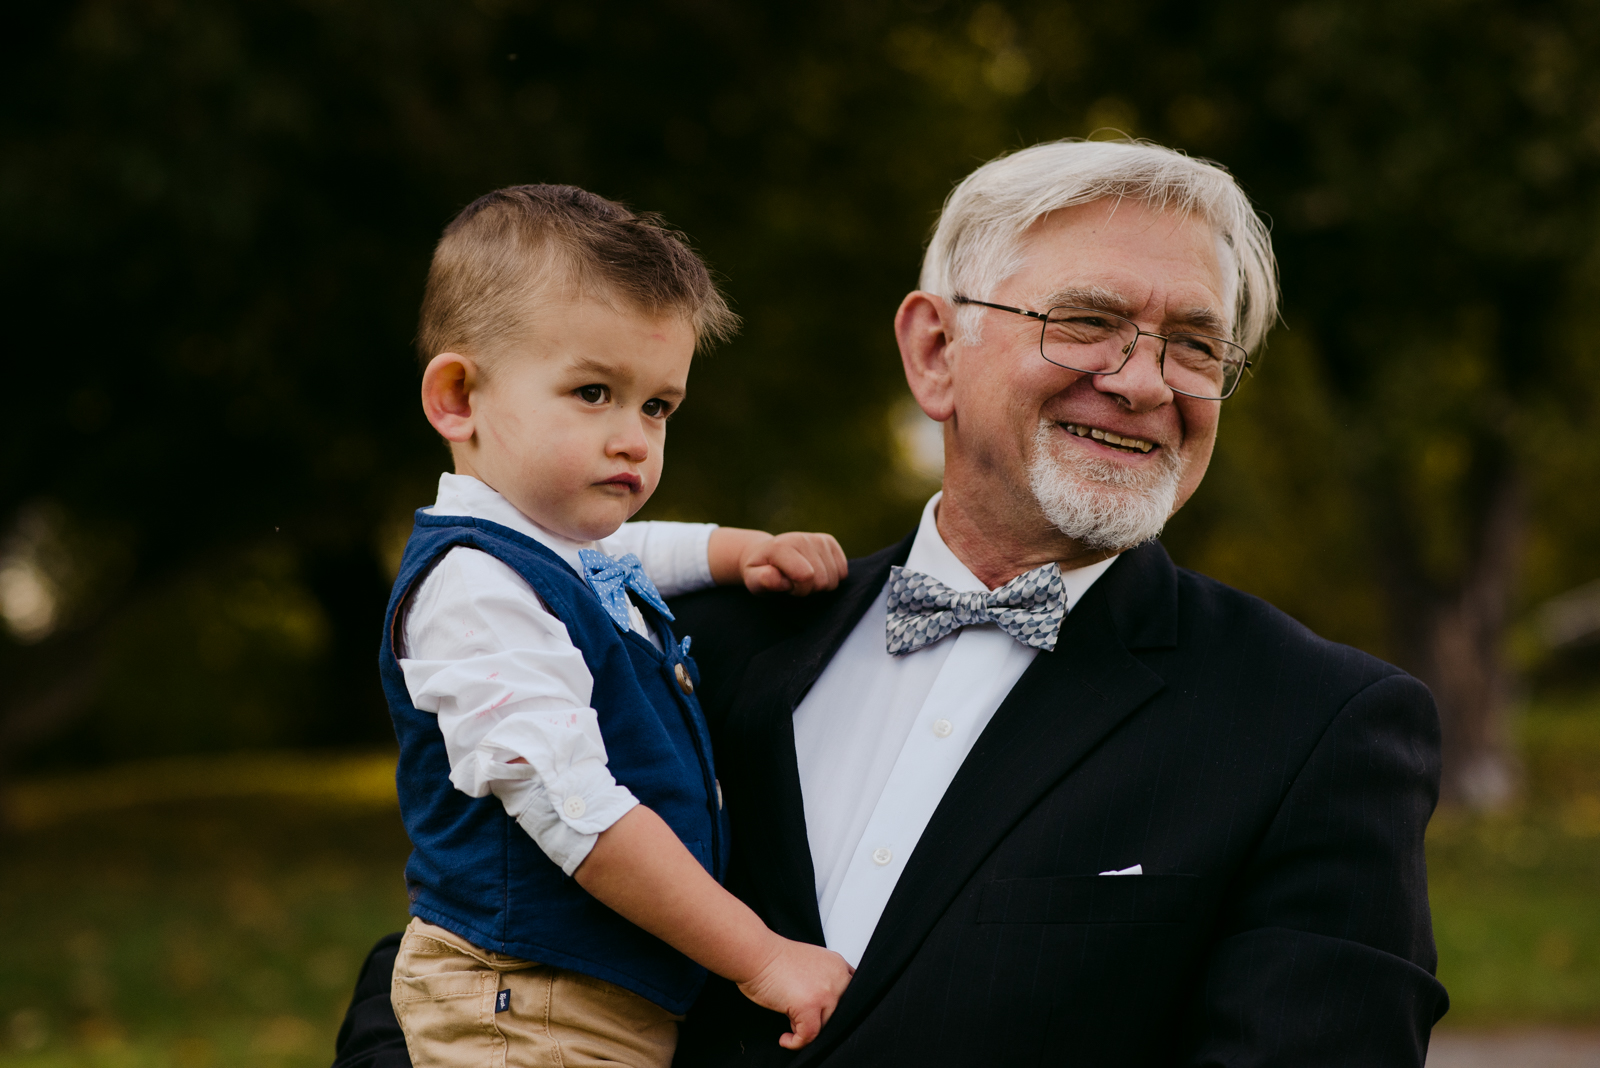 father of the groom and grandson smiling during outdoor reception